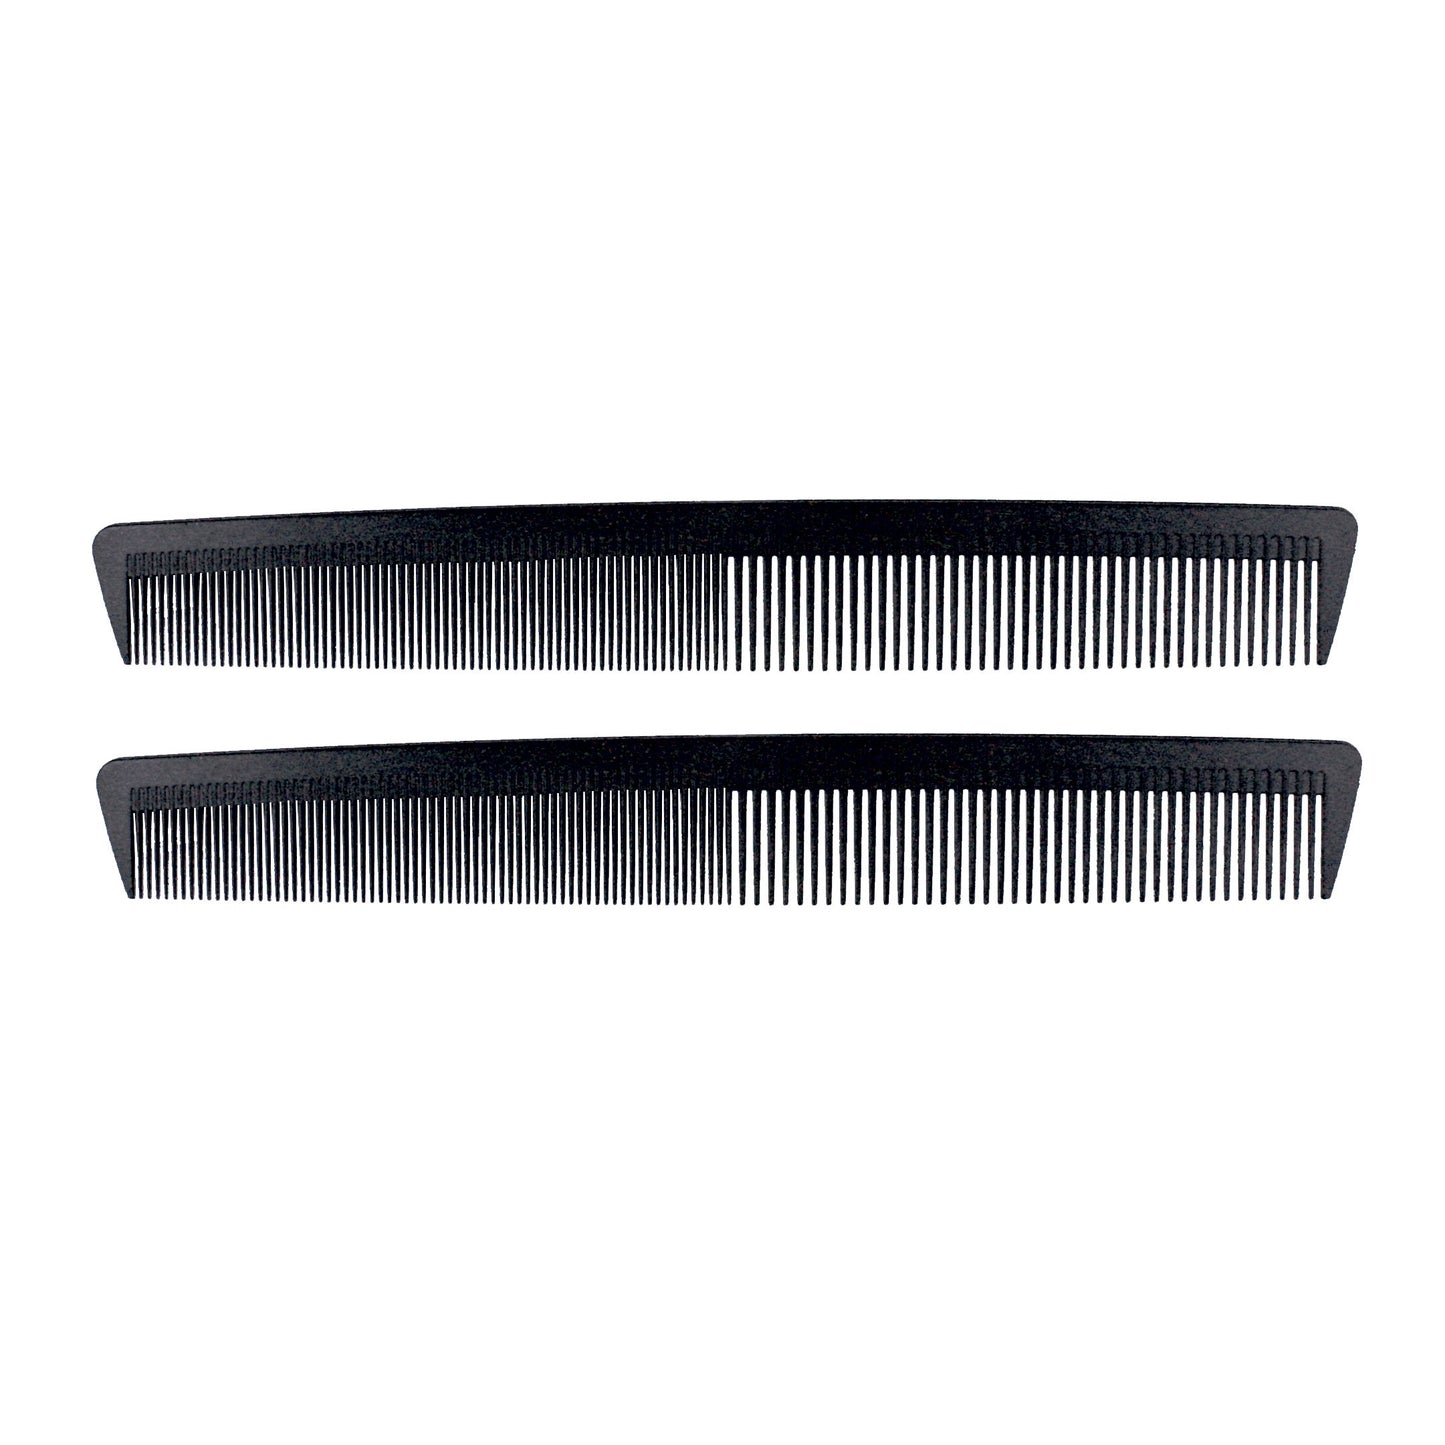 9in Carbon Styling Comb